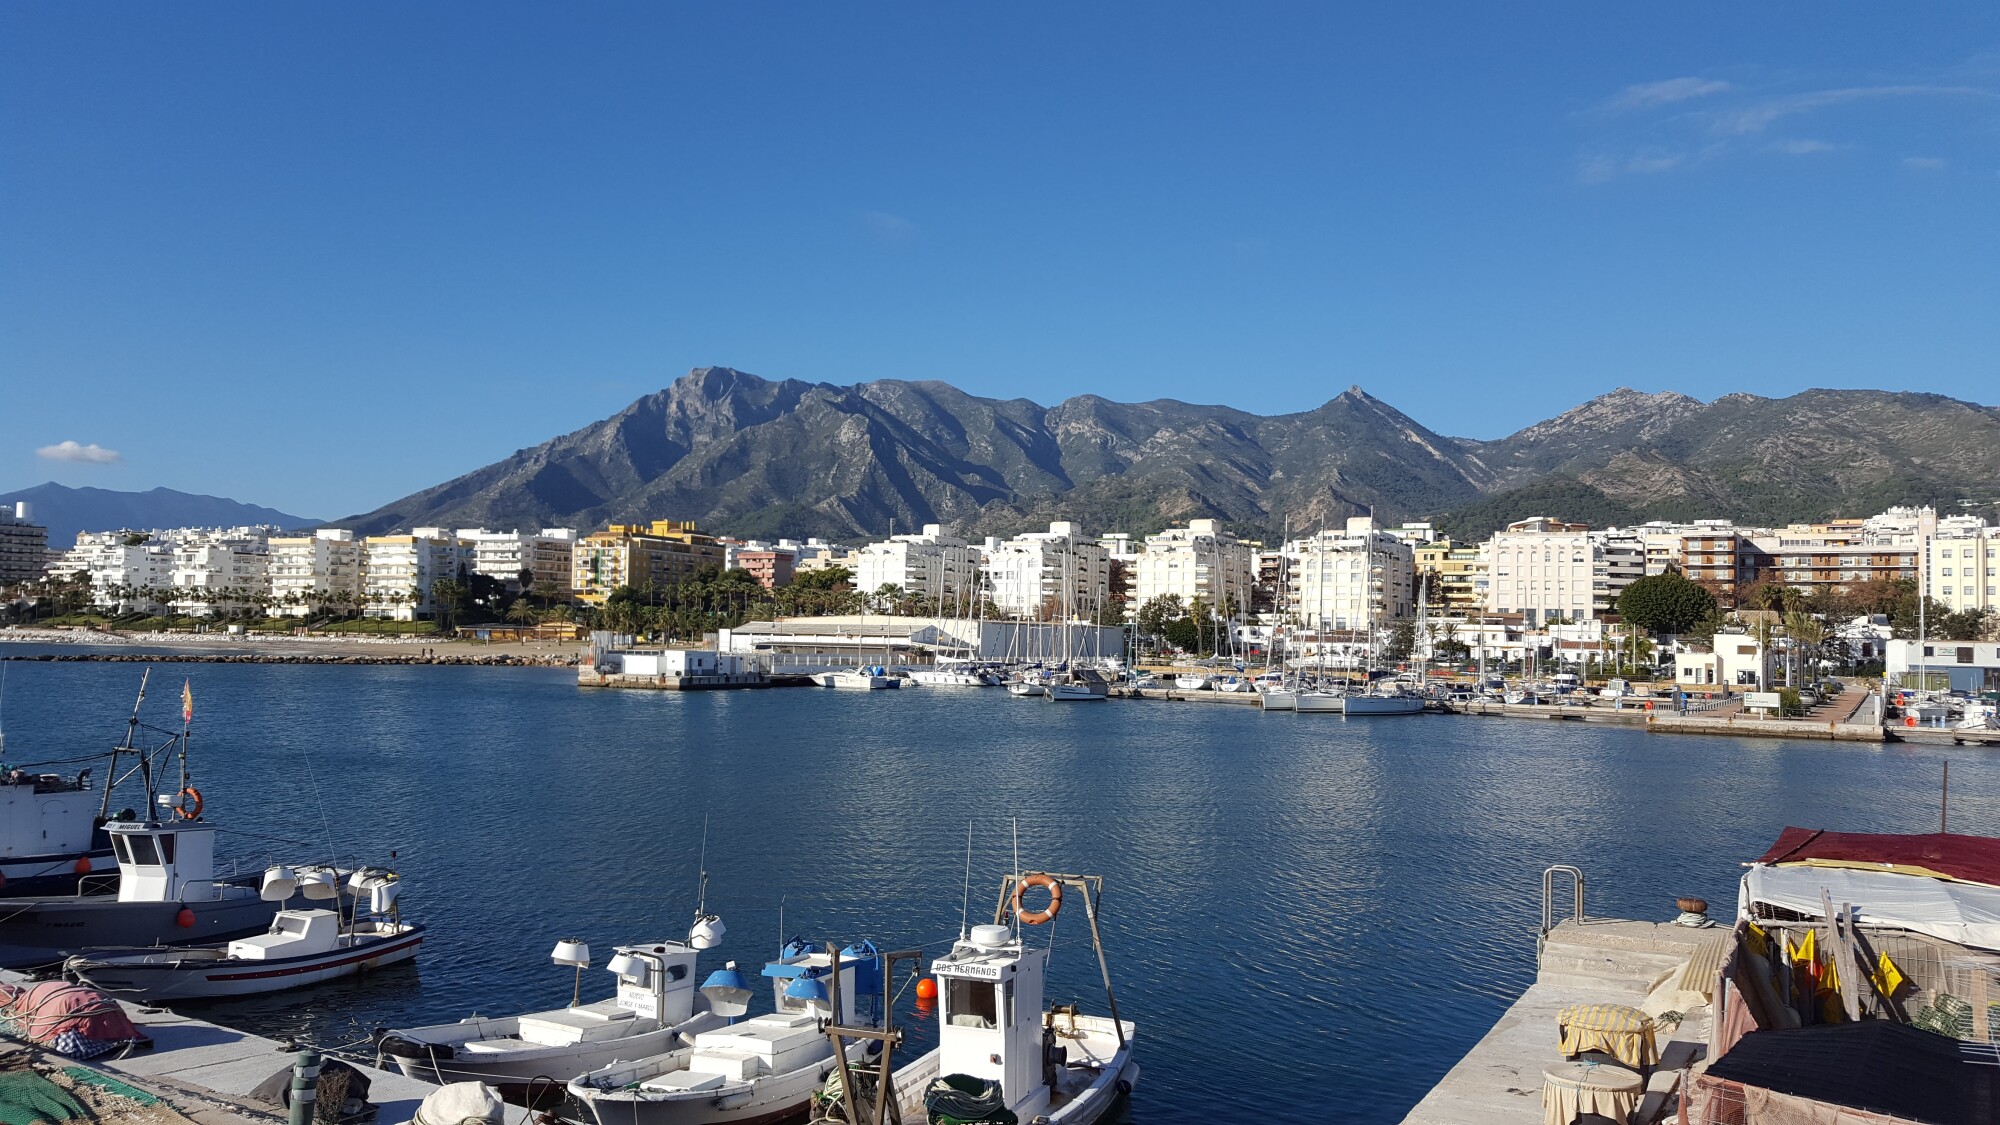 5 Things To Do in Marbella, Spain